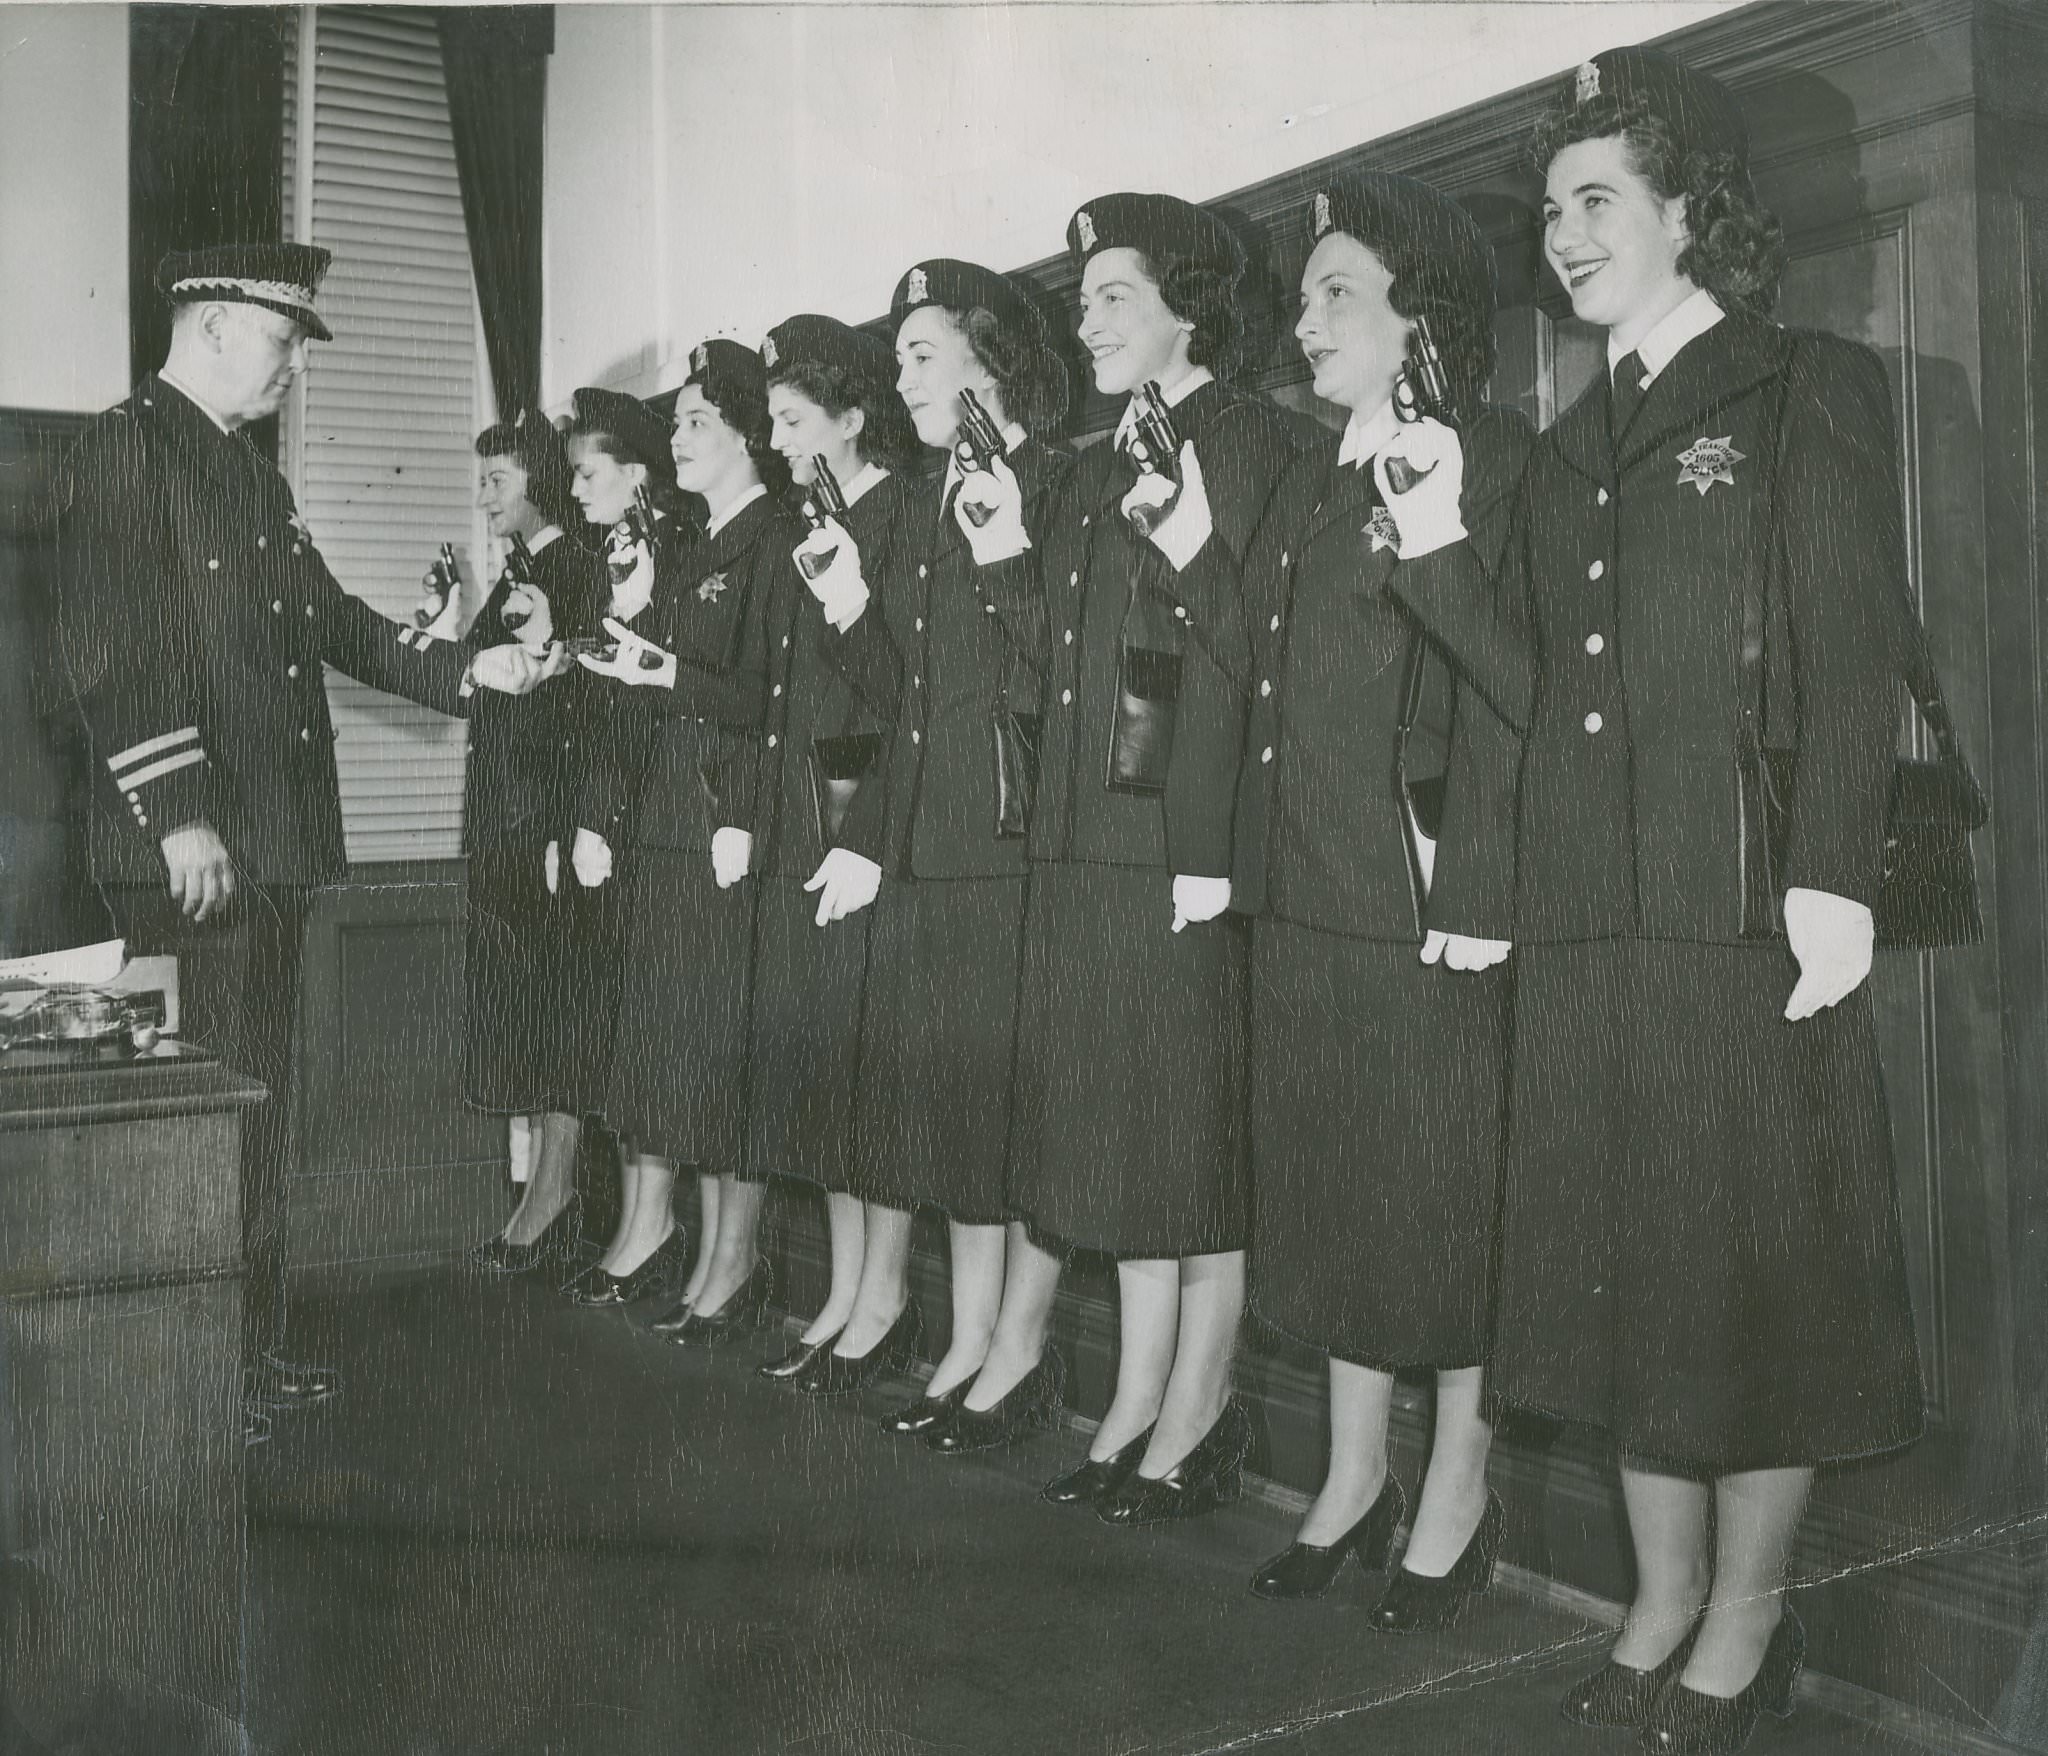 Female officers getting their service revolvers in San Fransisco, CA, US in 1949.